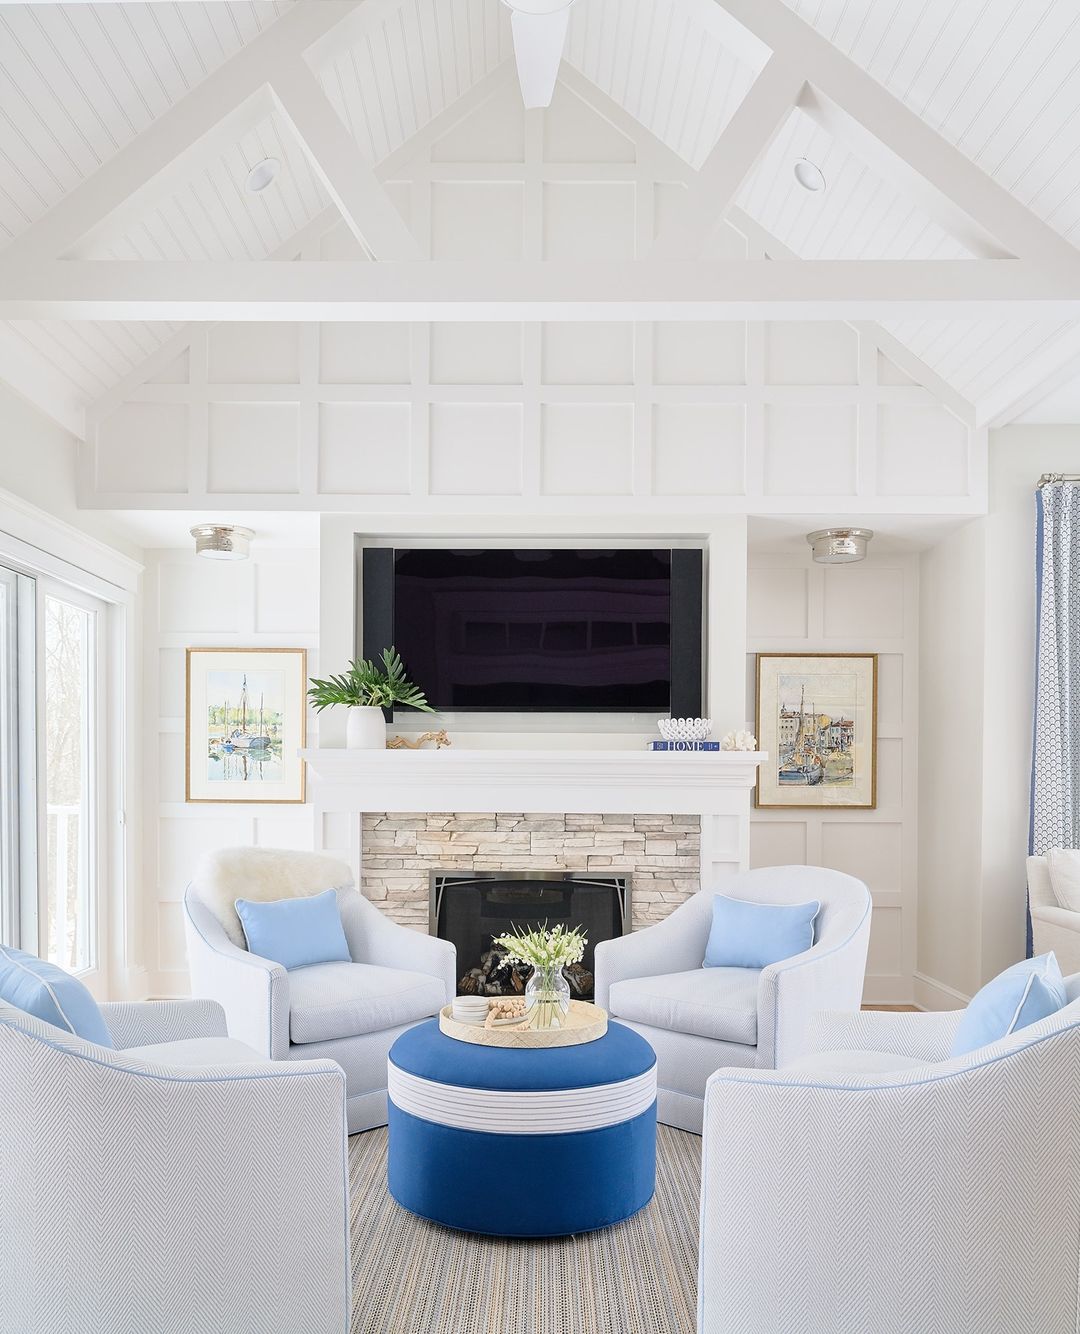 Coastal Style Living Room with TV Mounted on Wall. Photo by Instagram user @blakelyinteriordesign